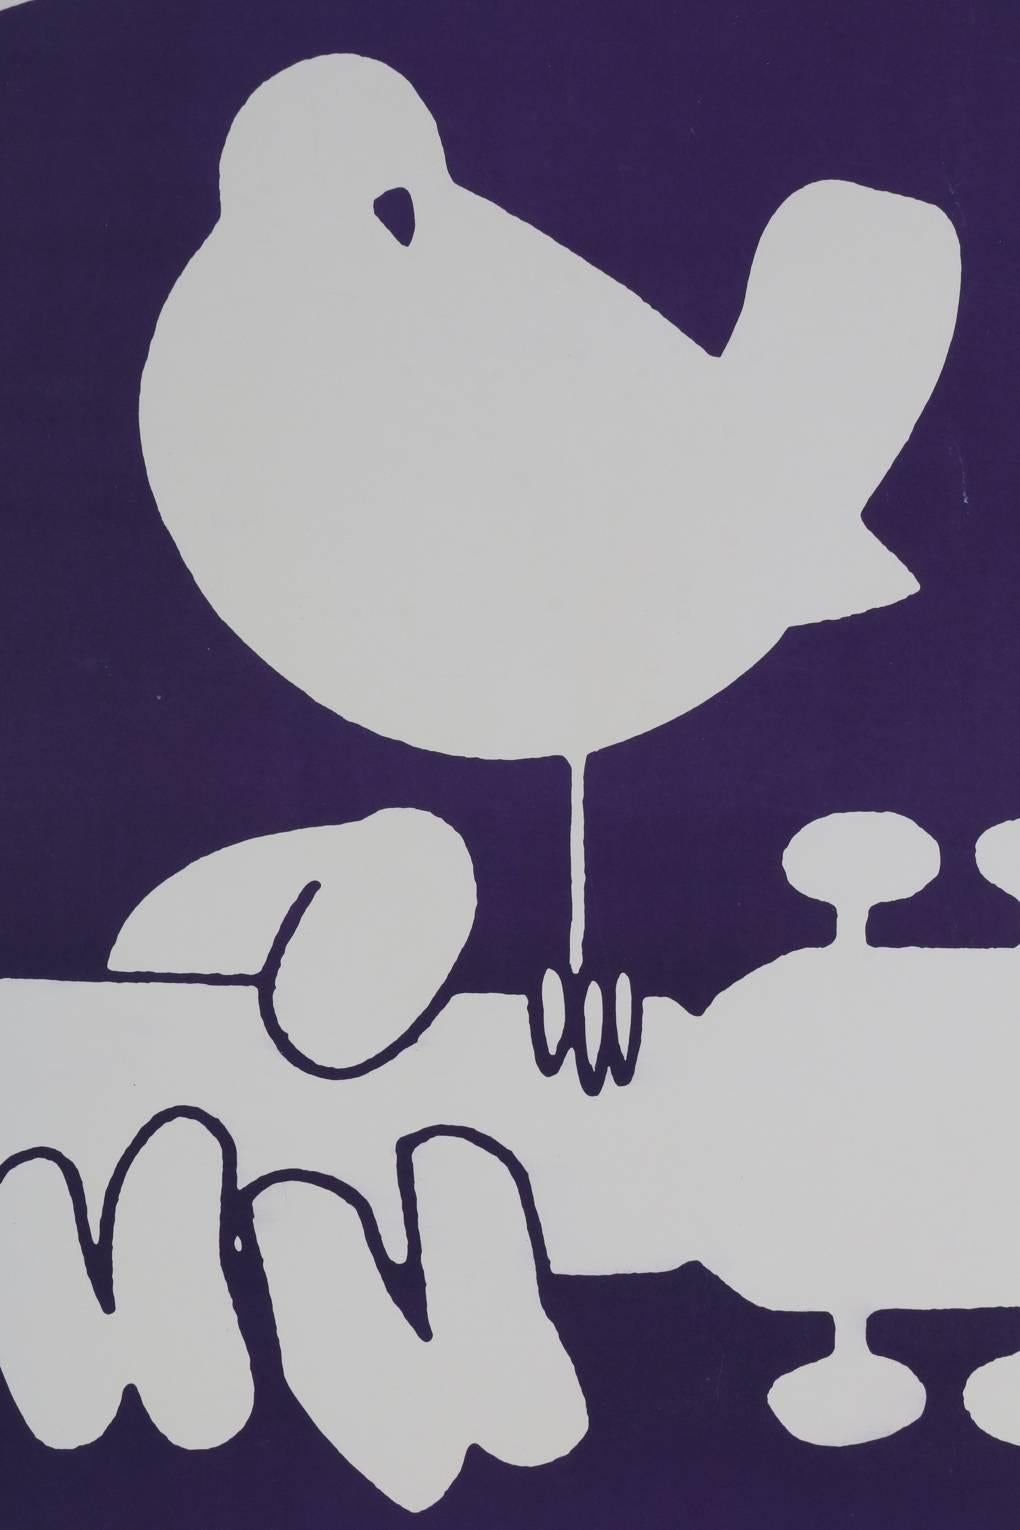 Original vintage Woodstock concert movie poster. Three days of peace and music. Original art by Arnold Skolnick. This poster was printed by Warner Brothers in 1969. This purple/ off-white edition was produced in limited quantities for the Woodstock